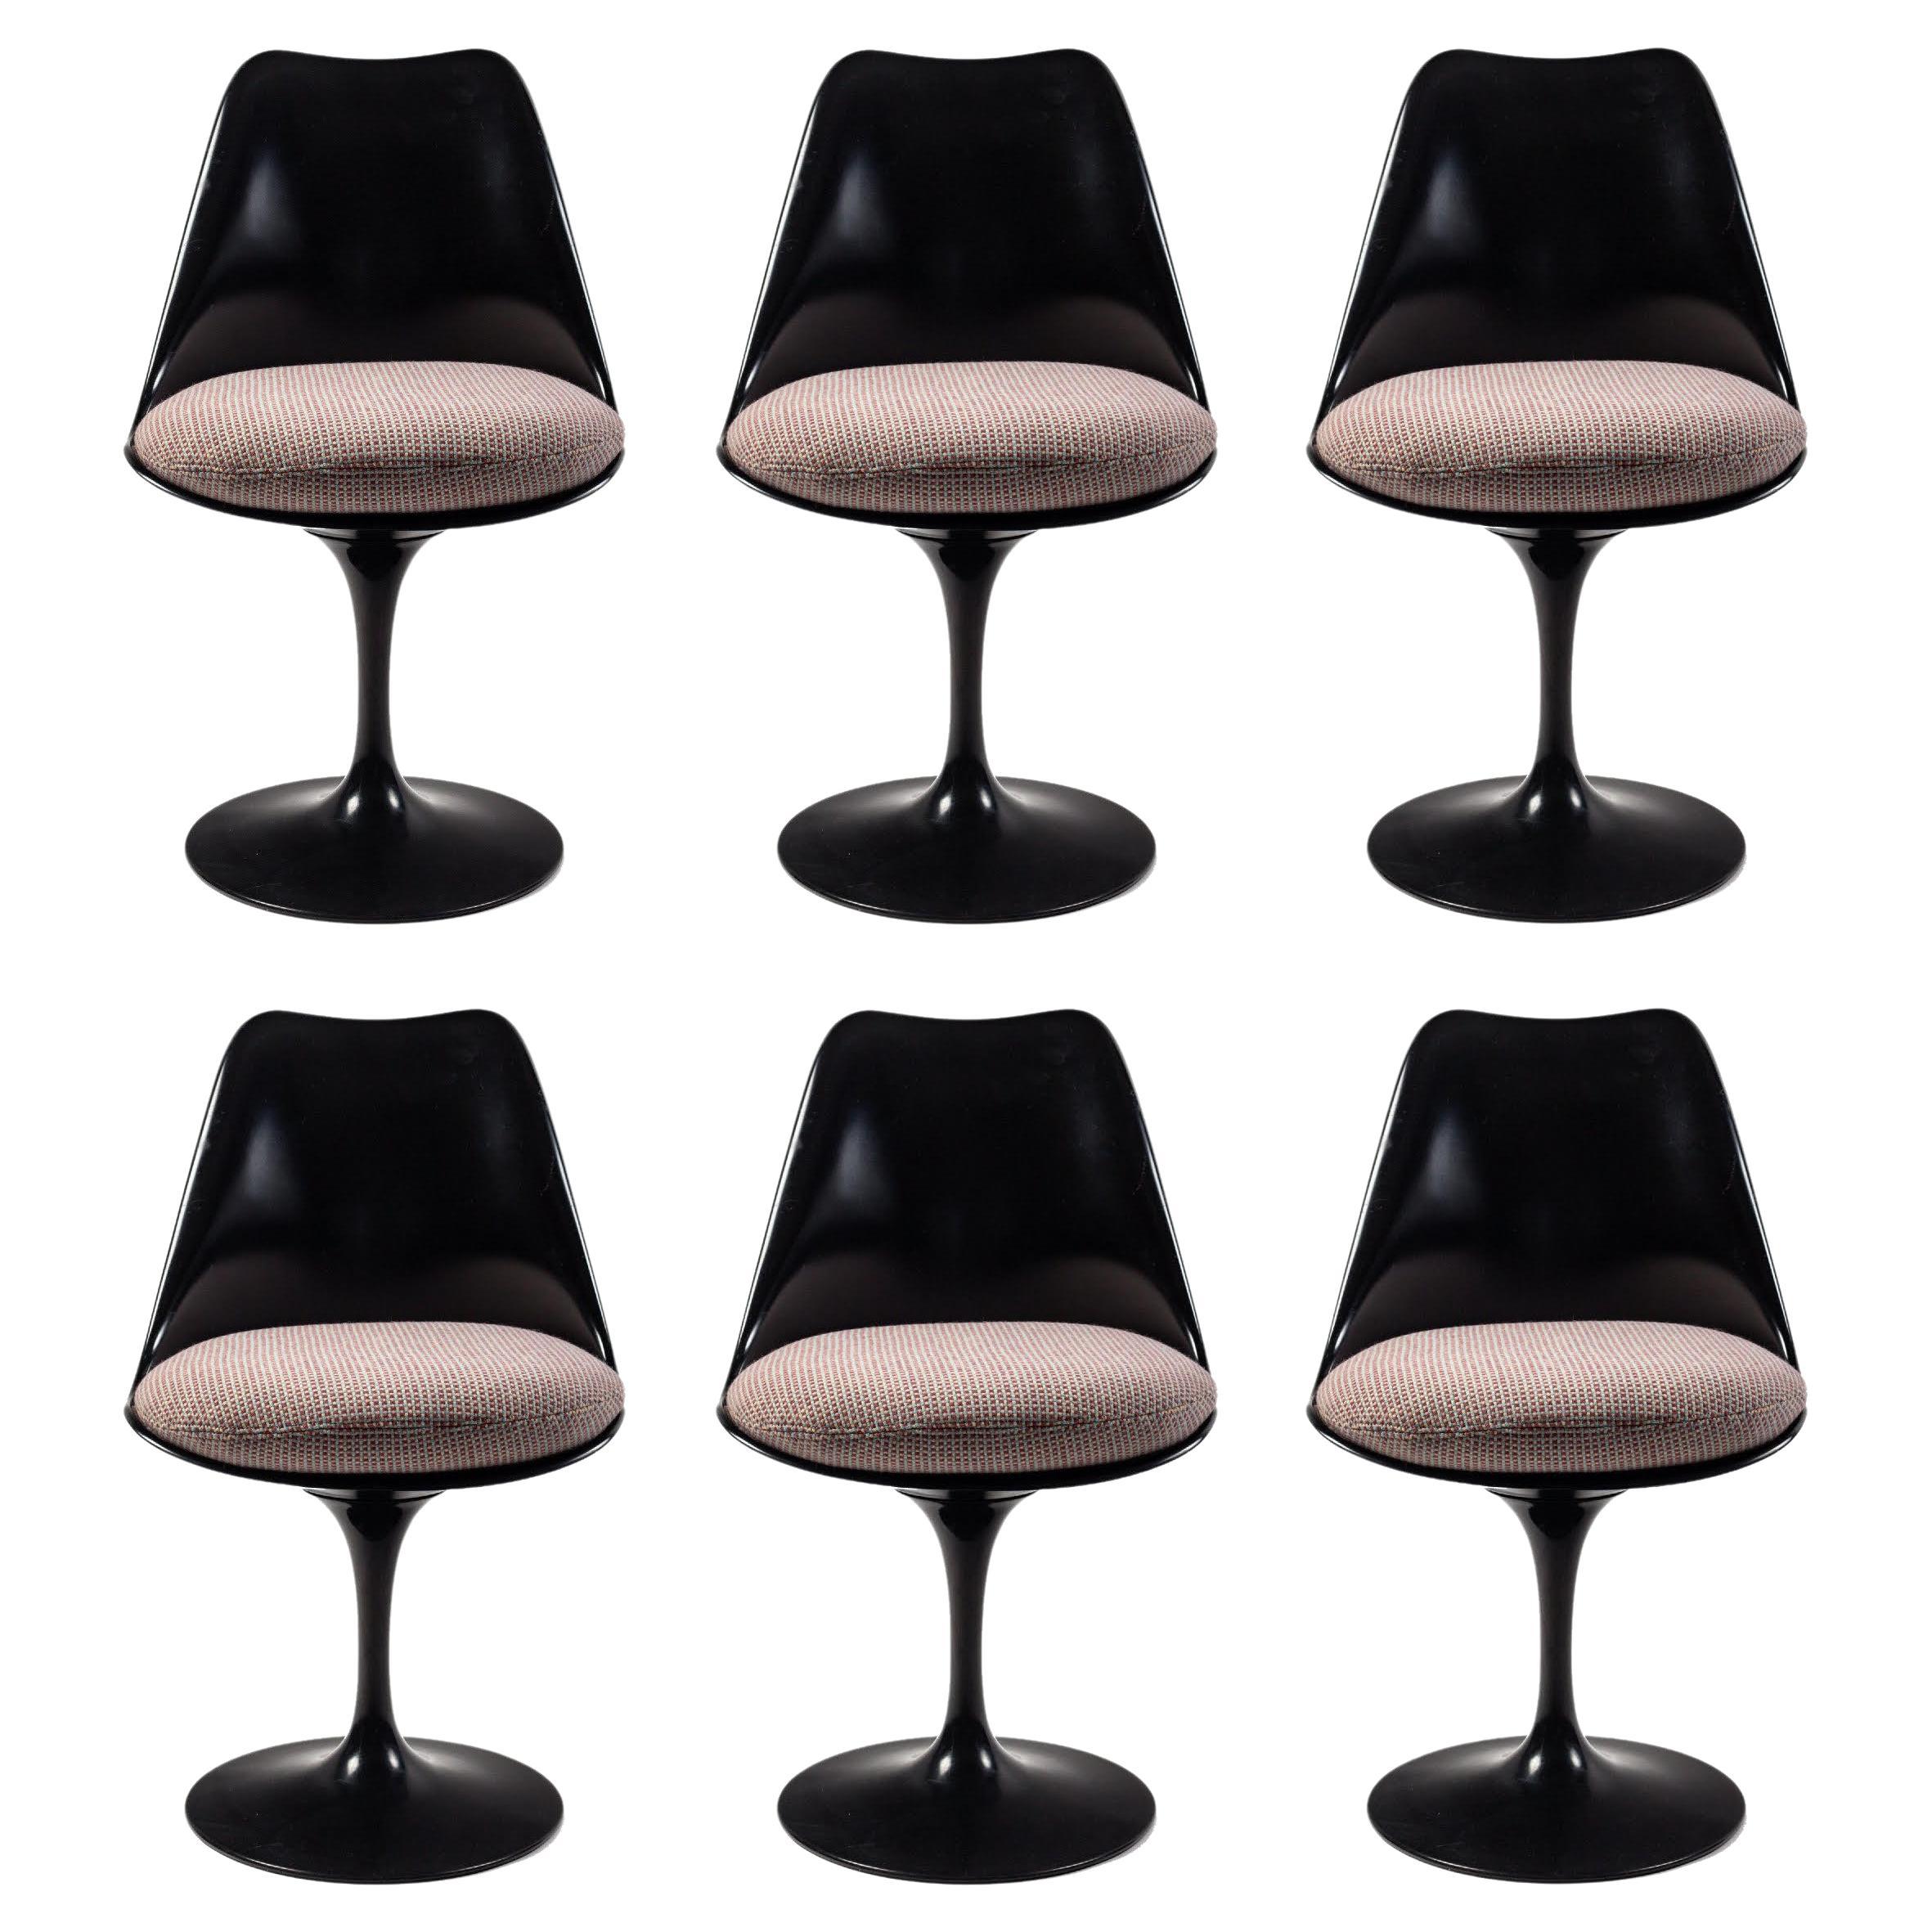 Set of 6 Tulip Dining Chairs by Eero Saarinen for Knoll, XXth Century. For Sale